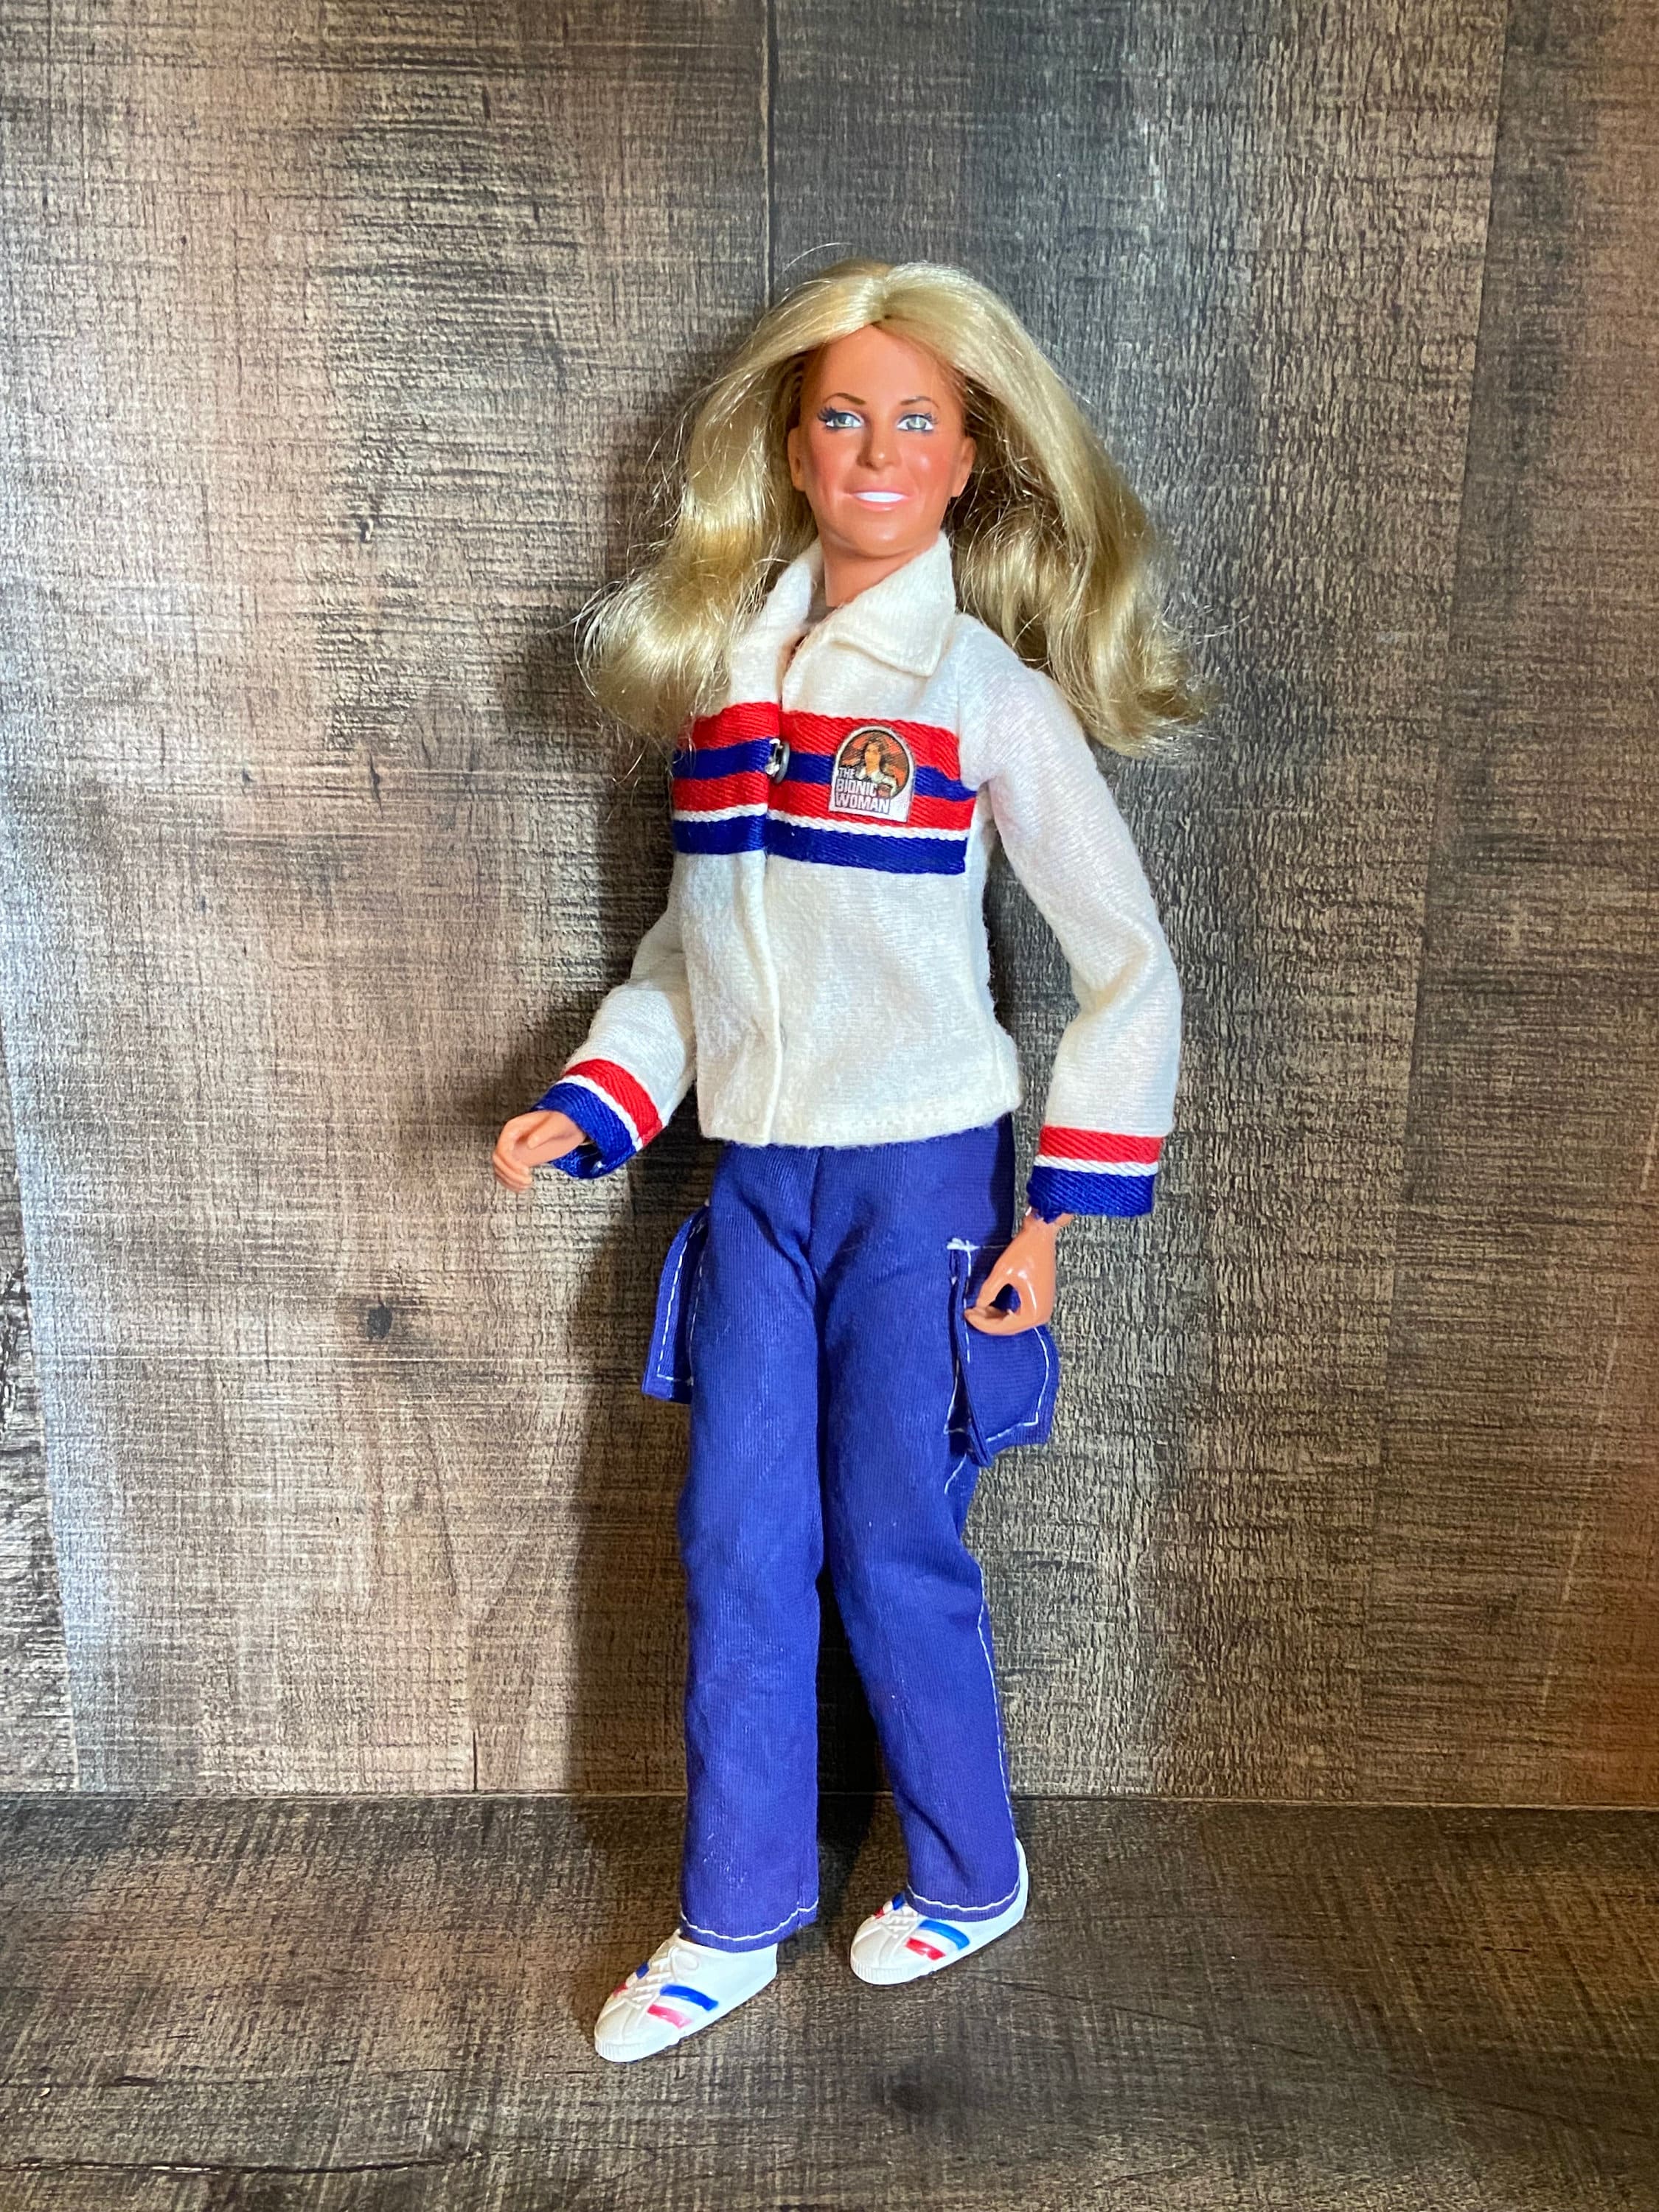 Jaime Sommers Bionic Woman Doll Kenner 1st Release, 1974 COMPLETE 